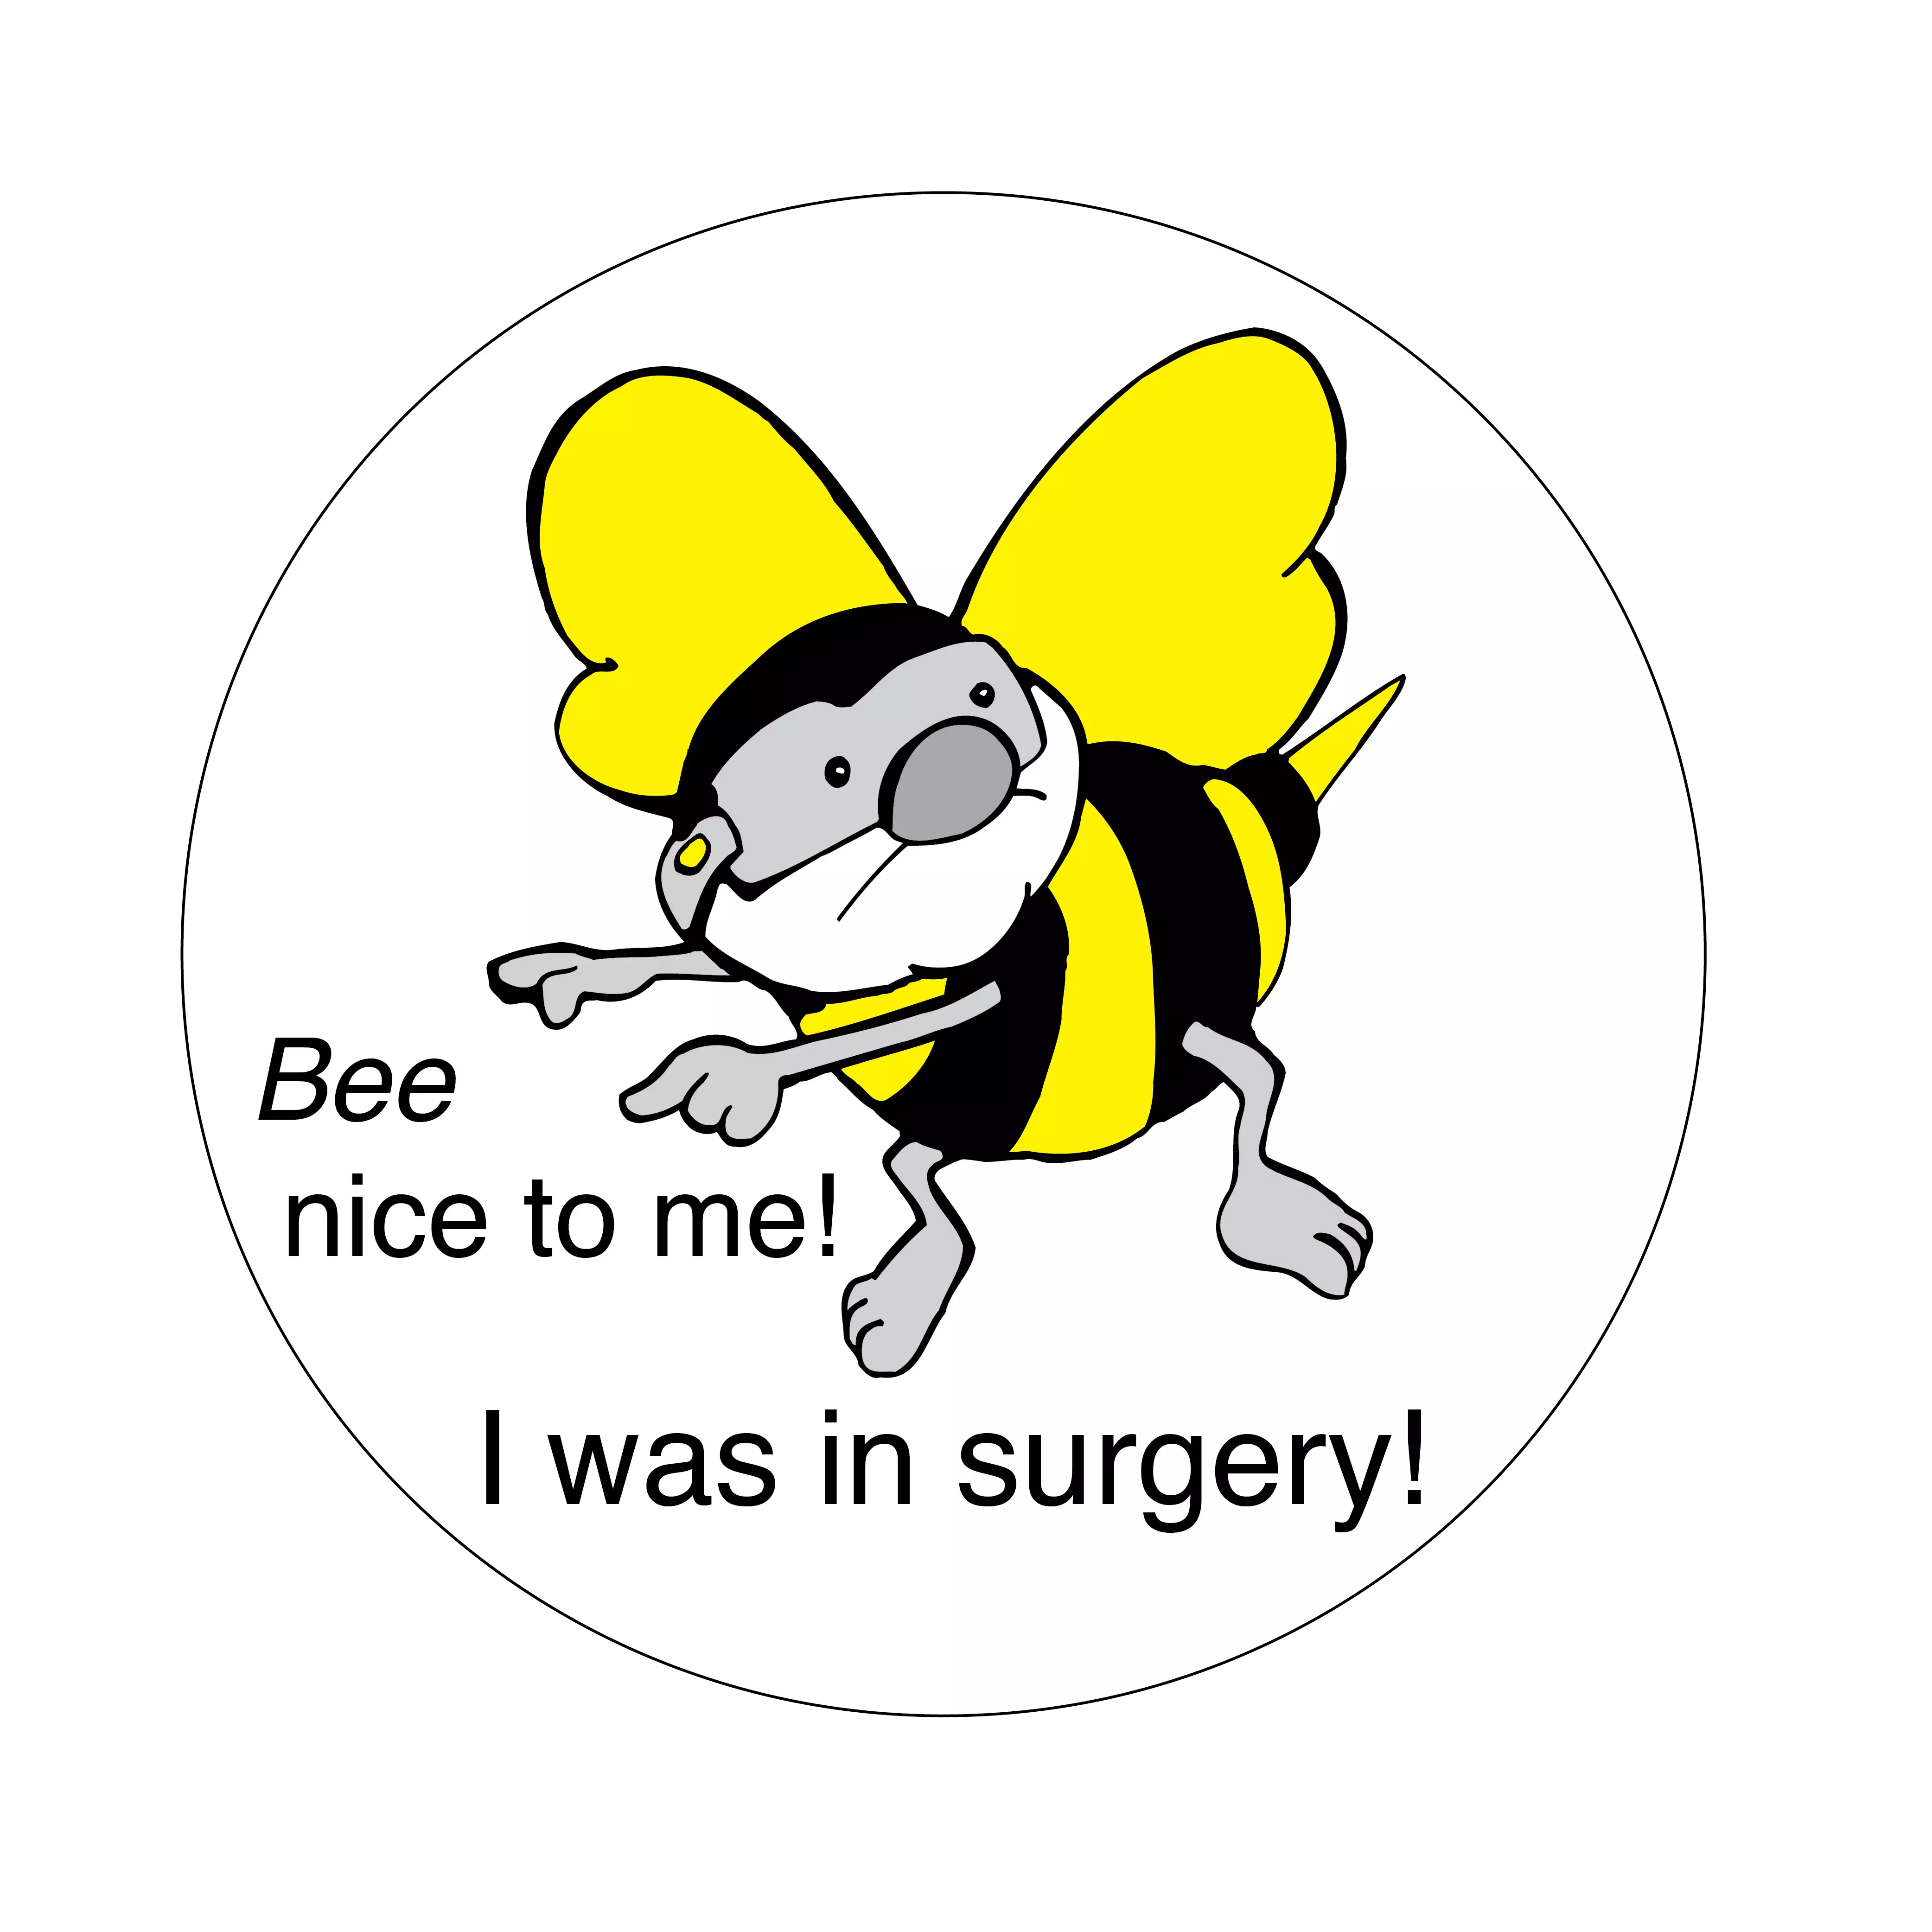 Bee Nice To Me! I Was In Surgery!